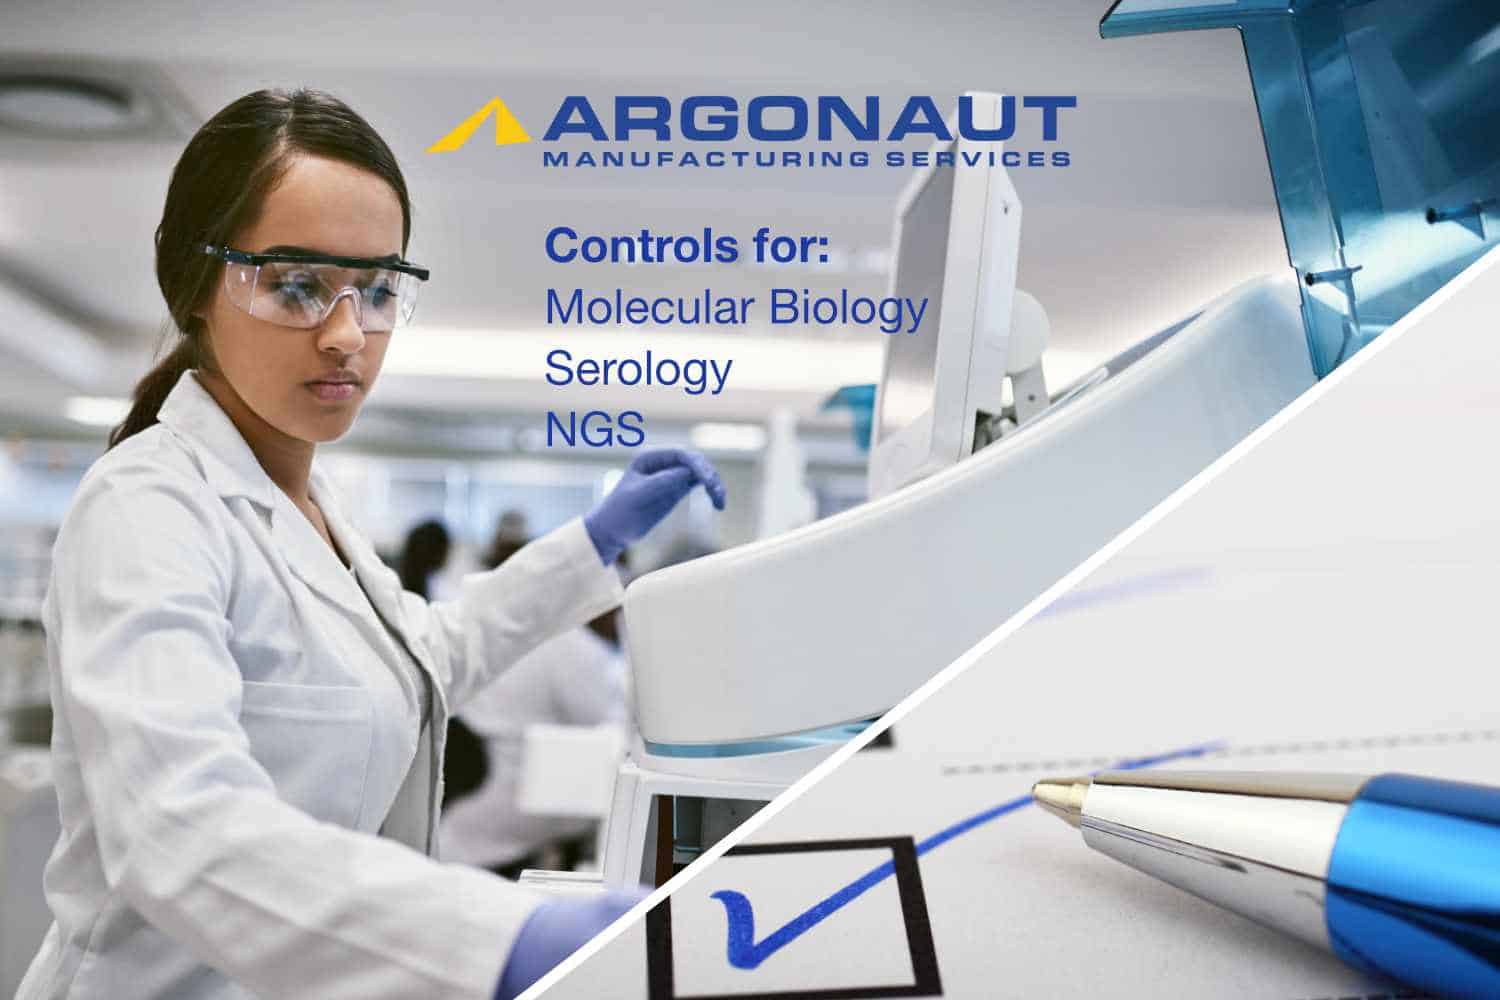 Argonaut Manufacturing Services Announces the opening of a Custom Controls and Standards facility